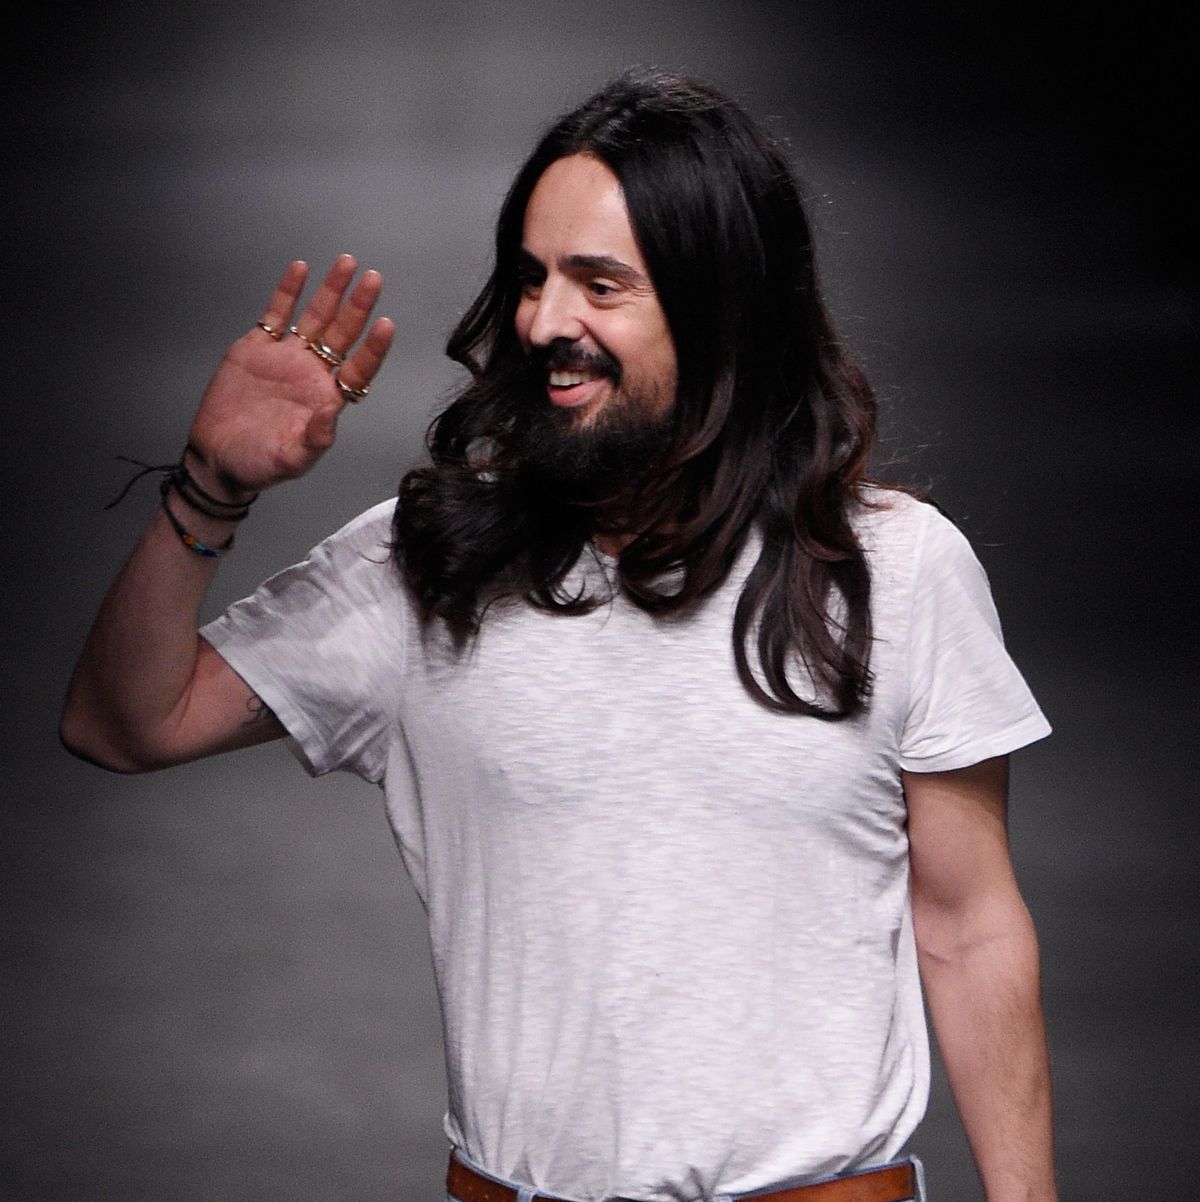 milan, italy february 24 designer alessandro michele walks the runway at the gucci show during milan fashion week fallwinter 201617 on february 24, 2016 in milan, italy photo by pietro dapranogetty images